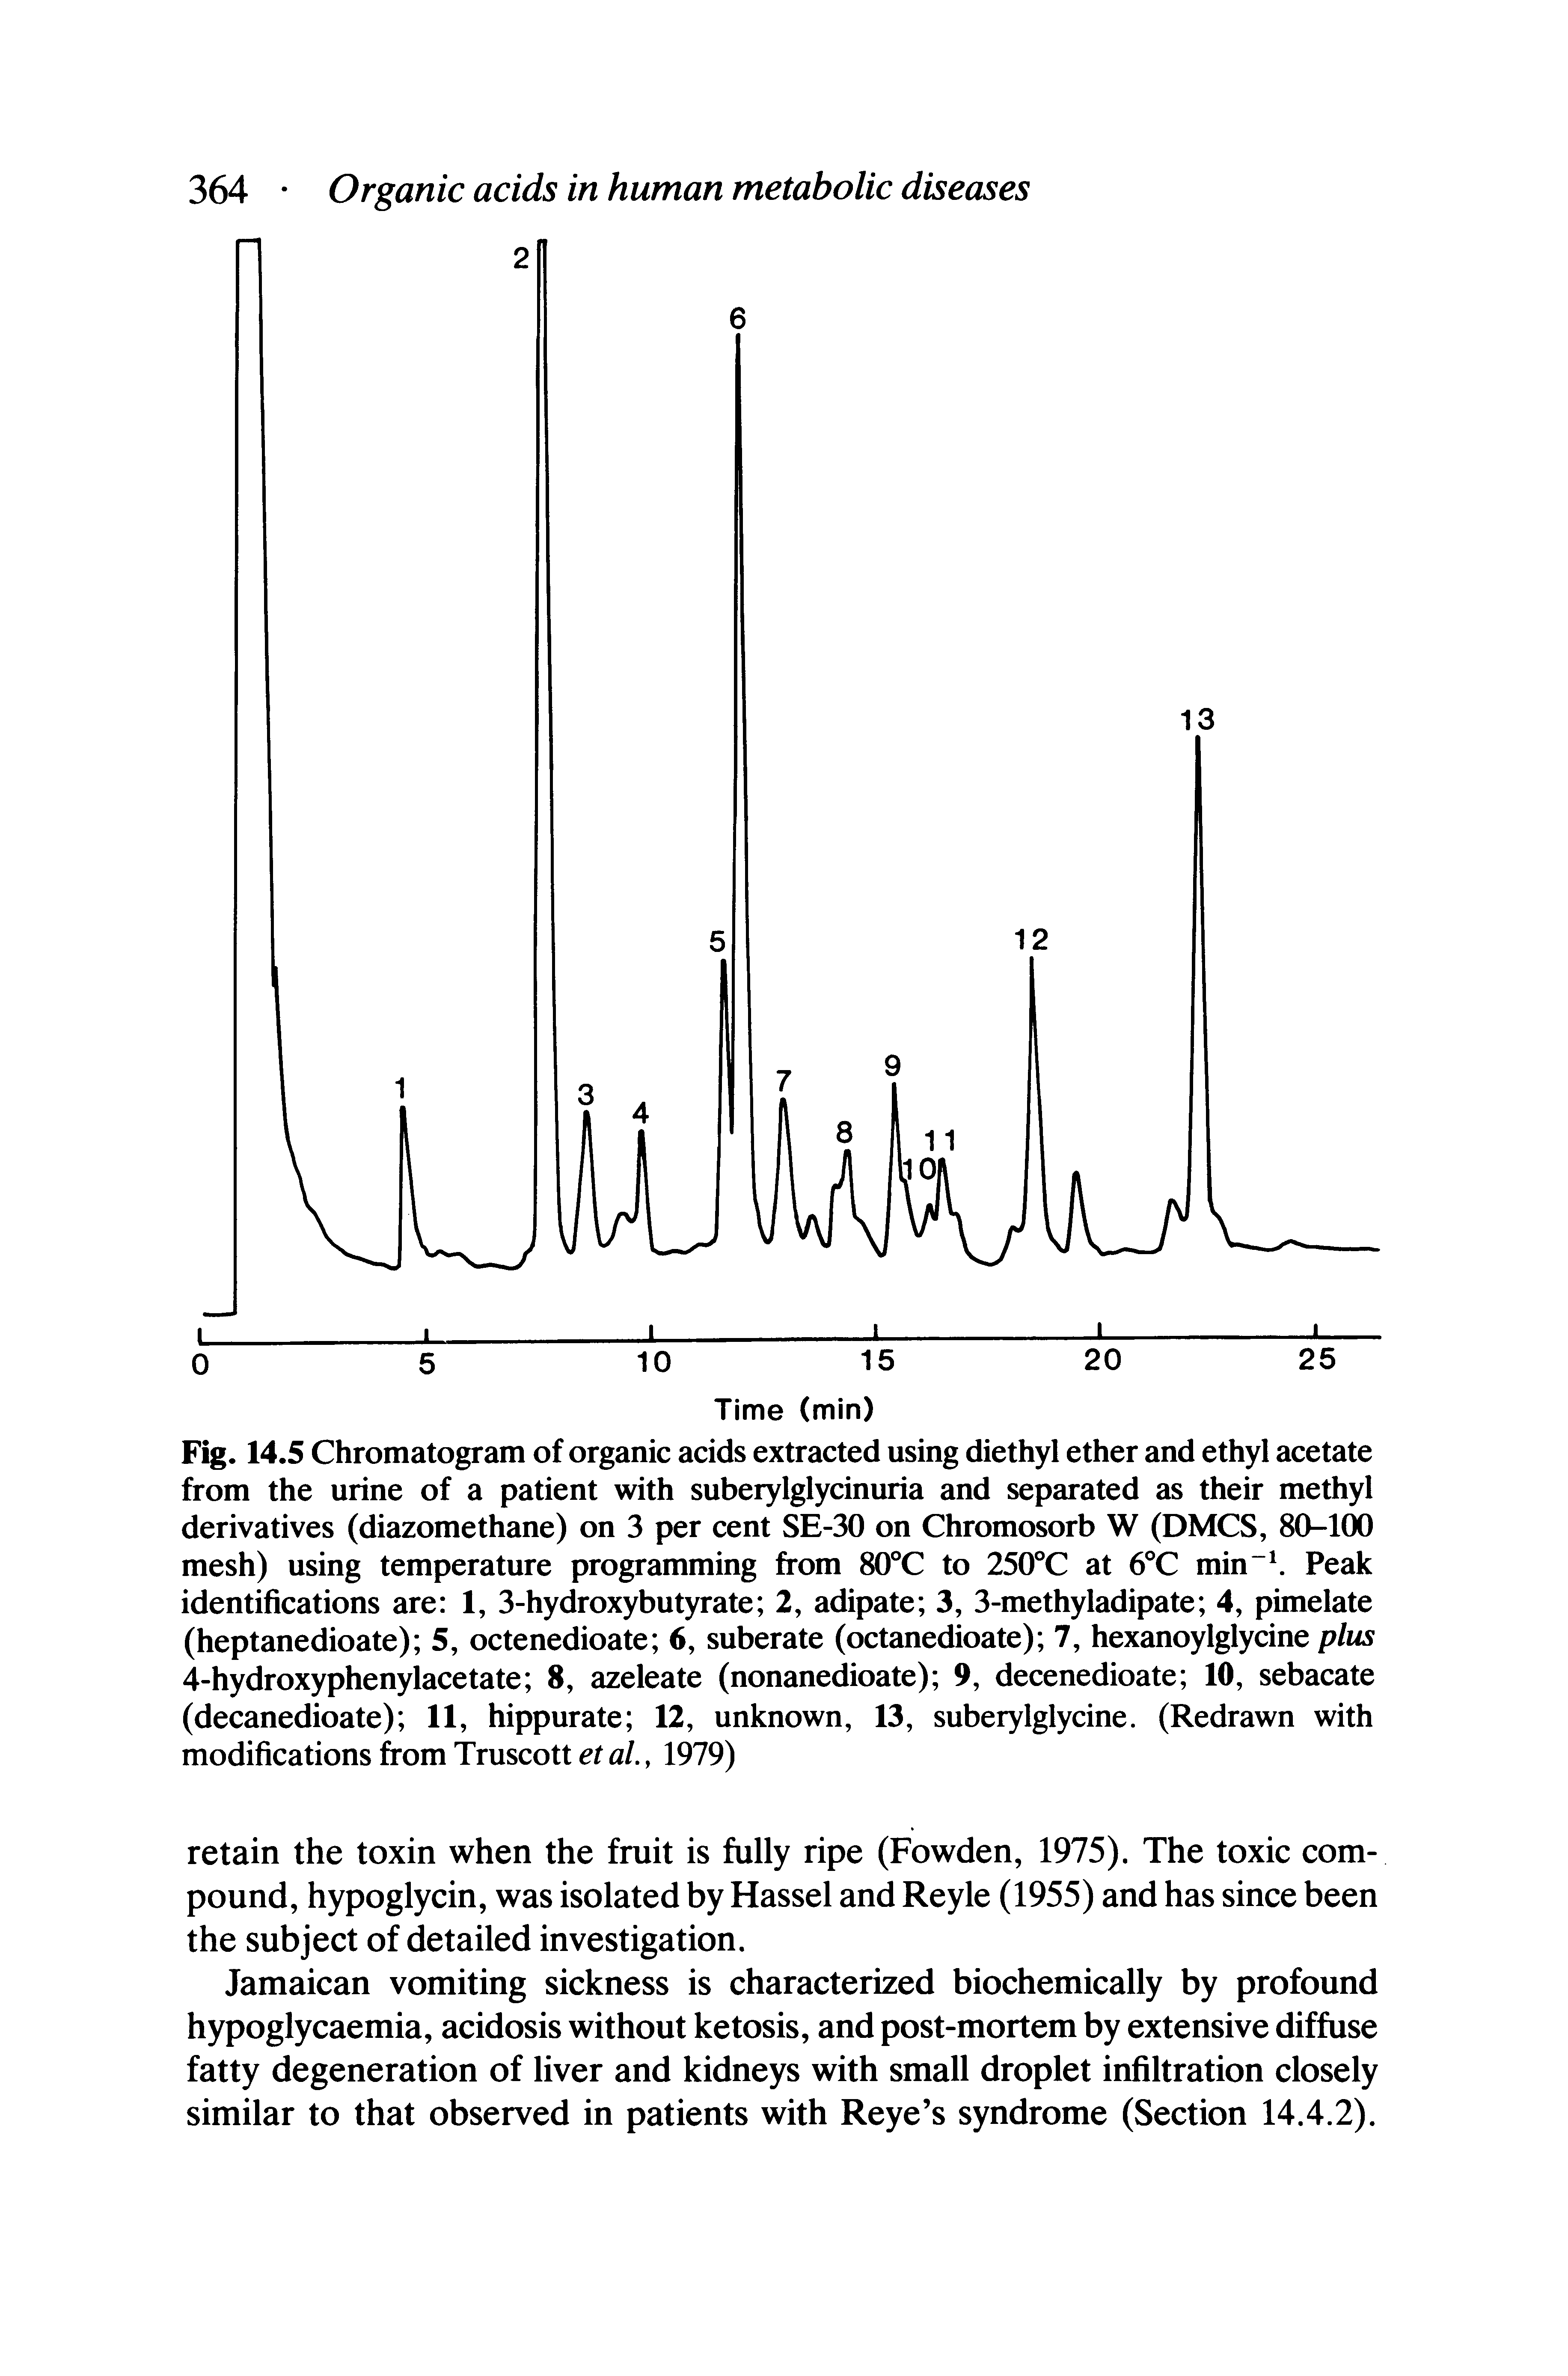 Fig. 14.5 Chromatogram of organic acids extracted using diethyl ether and ethyl acetate from the urine of a patient with suberylglycinuria and separated as their methyl derivatives (diazomethane) on 3 per cent SE-30 on Chromosorb W (DMCS, 80-100 mesh) using temperature programming from 80°C to 250°C at 6°C min Peak identifications are 1, 3-hydroxybutyrate 2, adipate 3, 3-methyladipate 4, pimelate (heptanedioate) 5, octenedioate 6, suberate (octanedioate) 7, hexanoylglycine plus 4-hydroxyphenylacetate 8, azeleate (nonanedioate) 9, decenedioate 10, sebacate (decanedioate) 11, hippurate 12, unknown, 13, suberylglycine. (Redrawn with modifications from Truscott et al., 1979)...